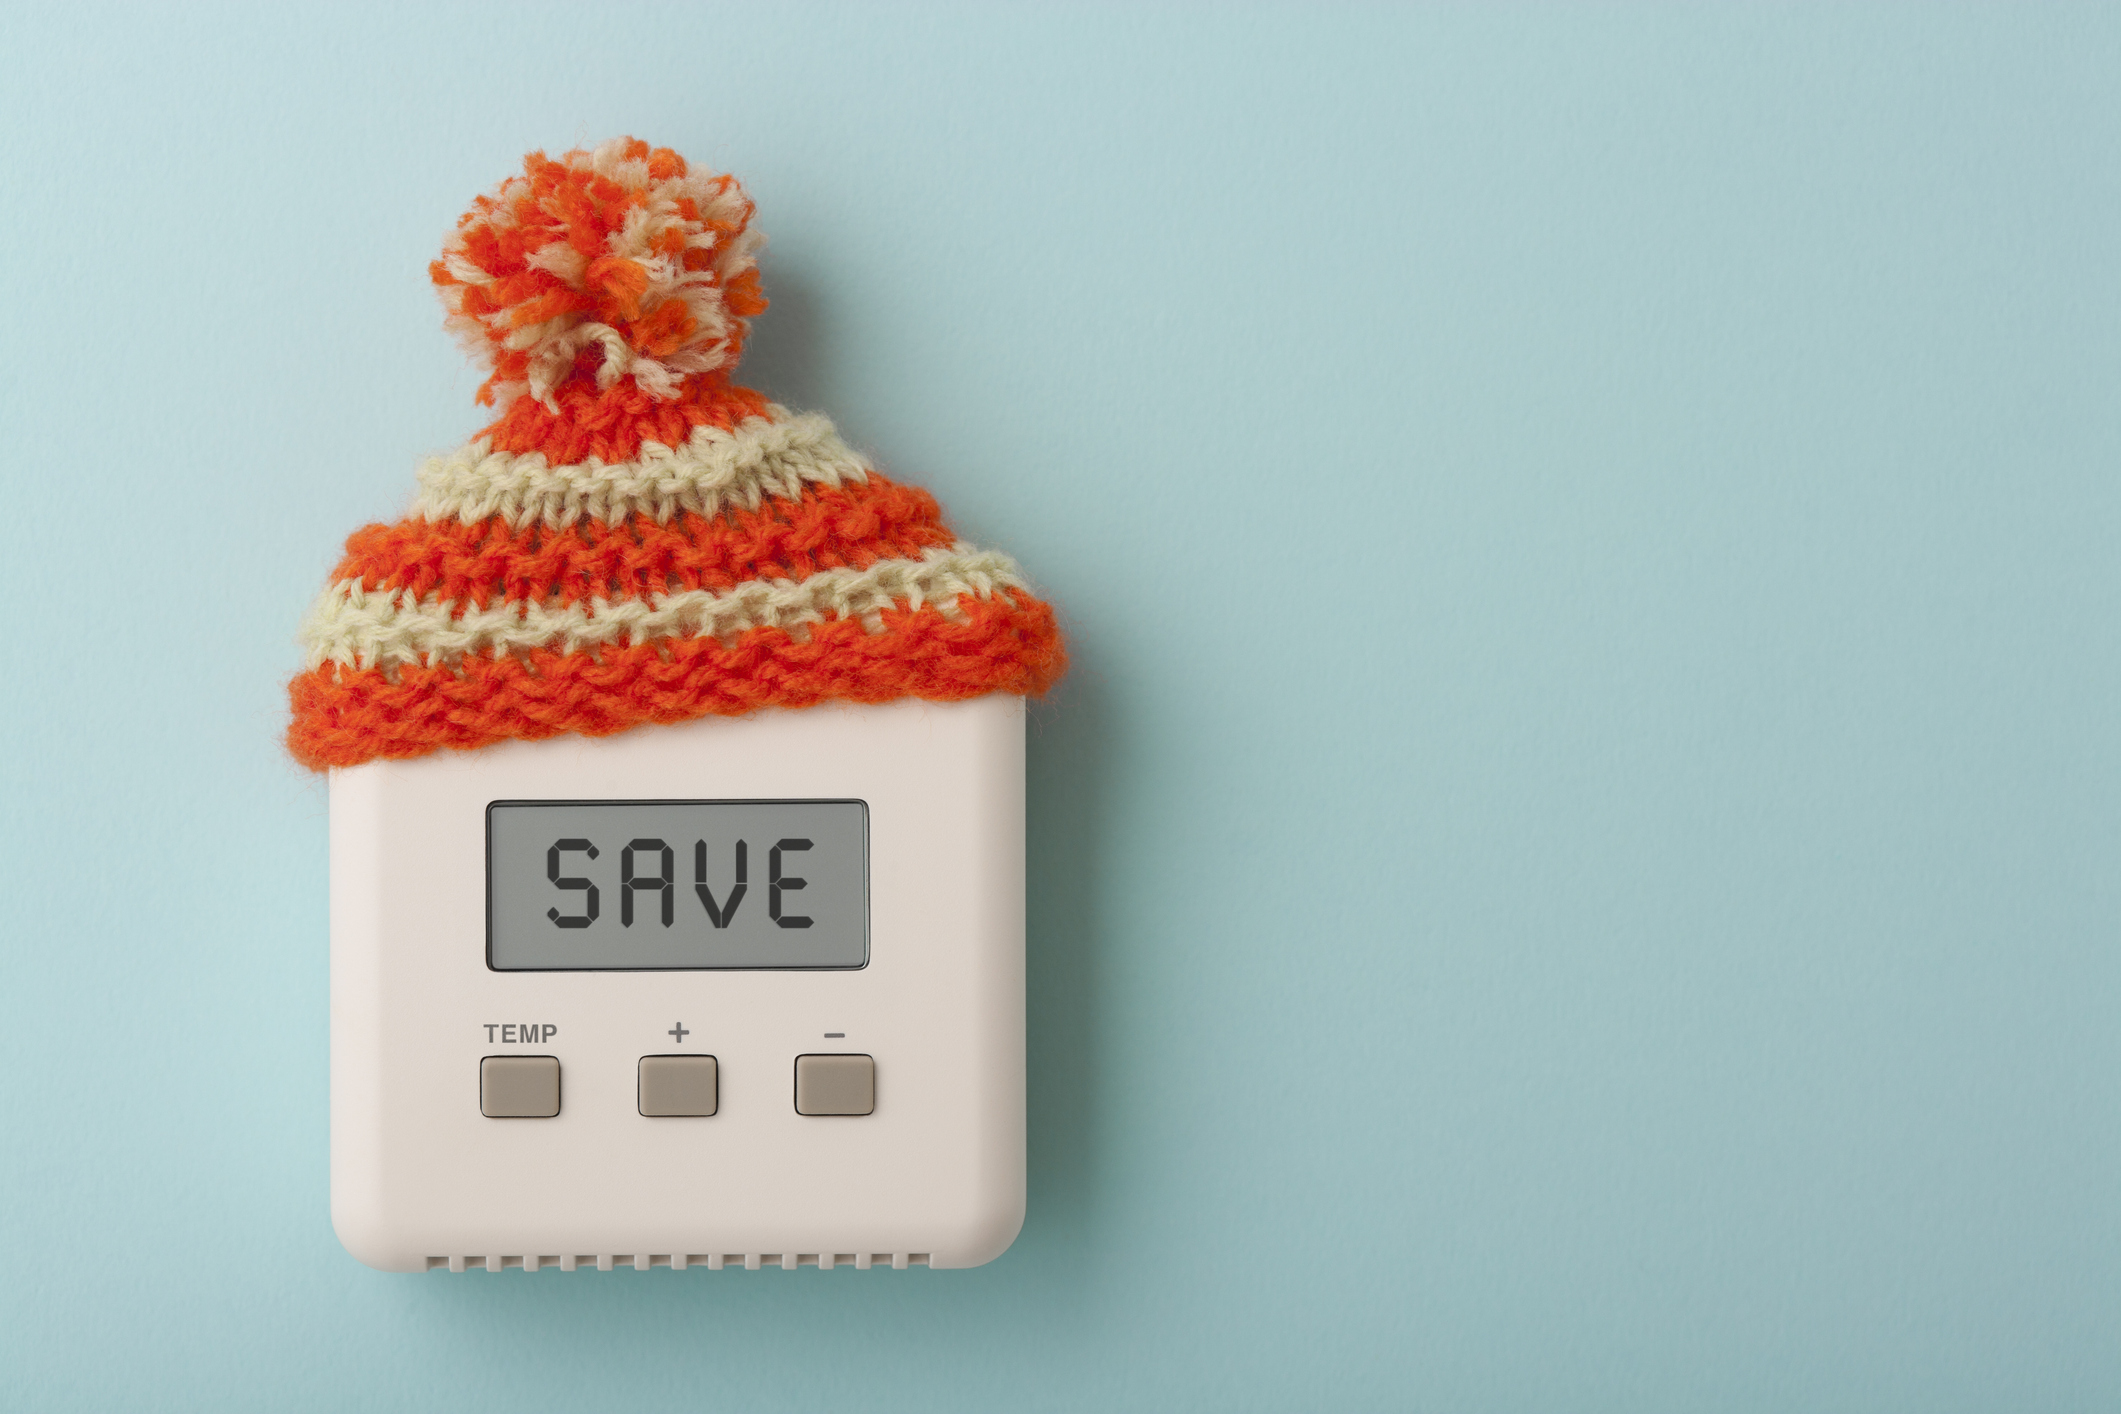 thermostat with knit hat on